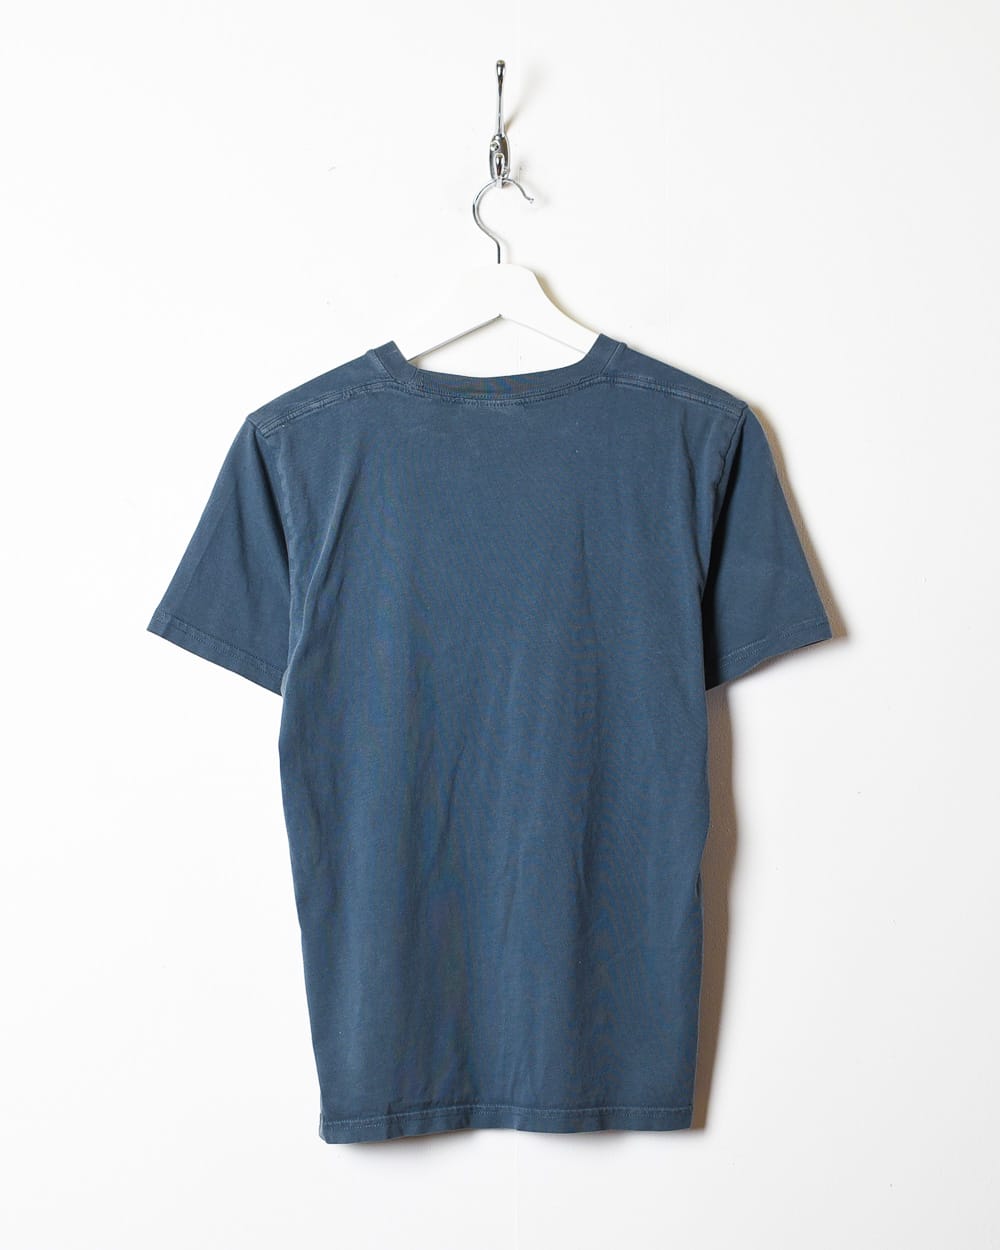 Navy Carhartt Airlines T-Shirt - X-Small